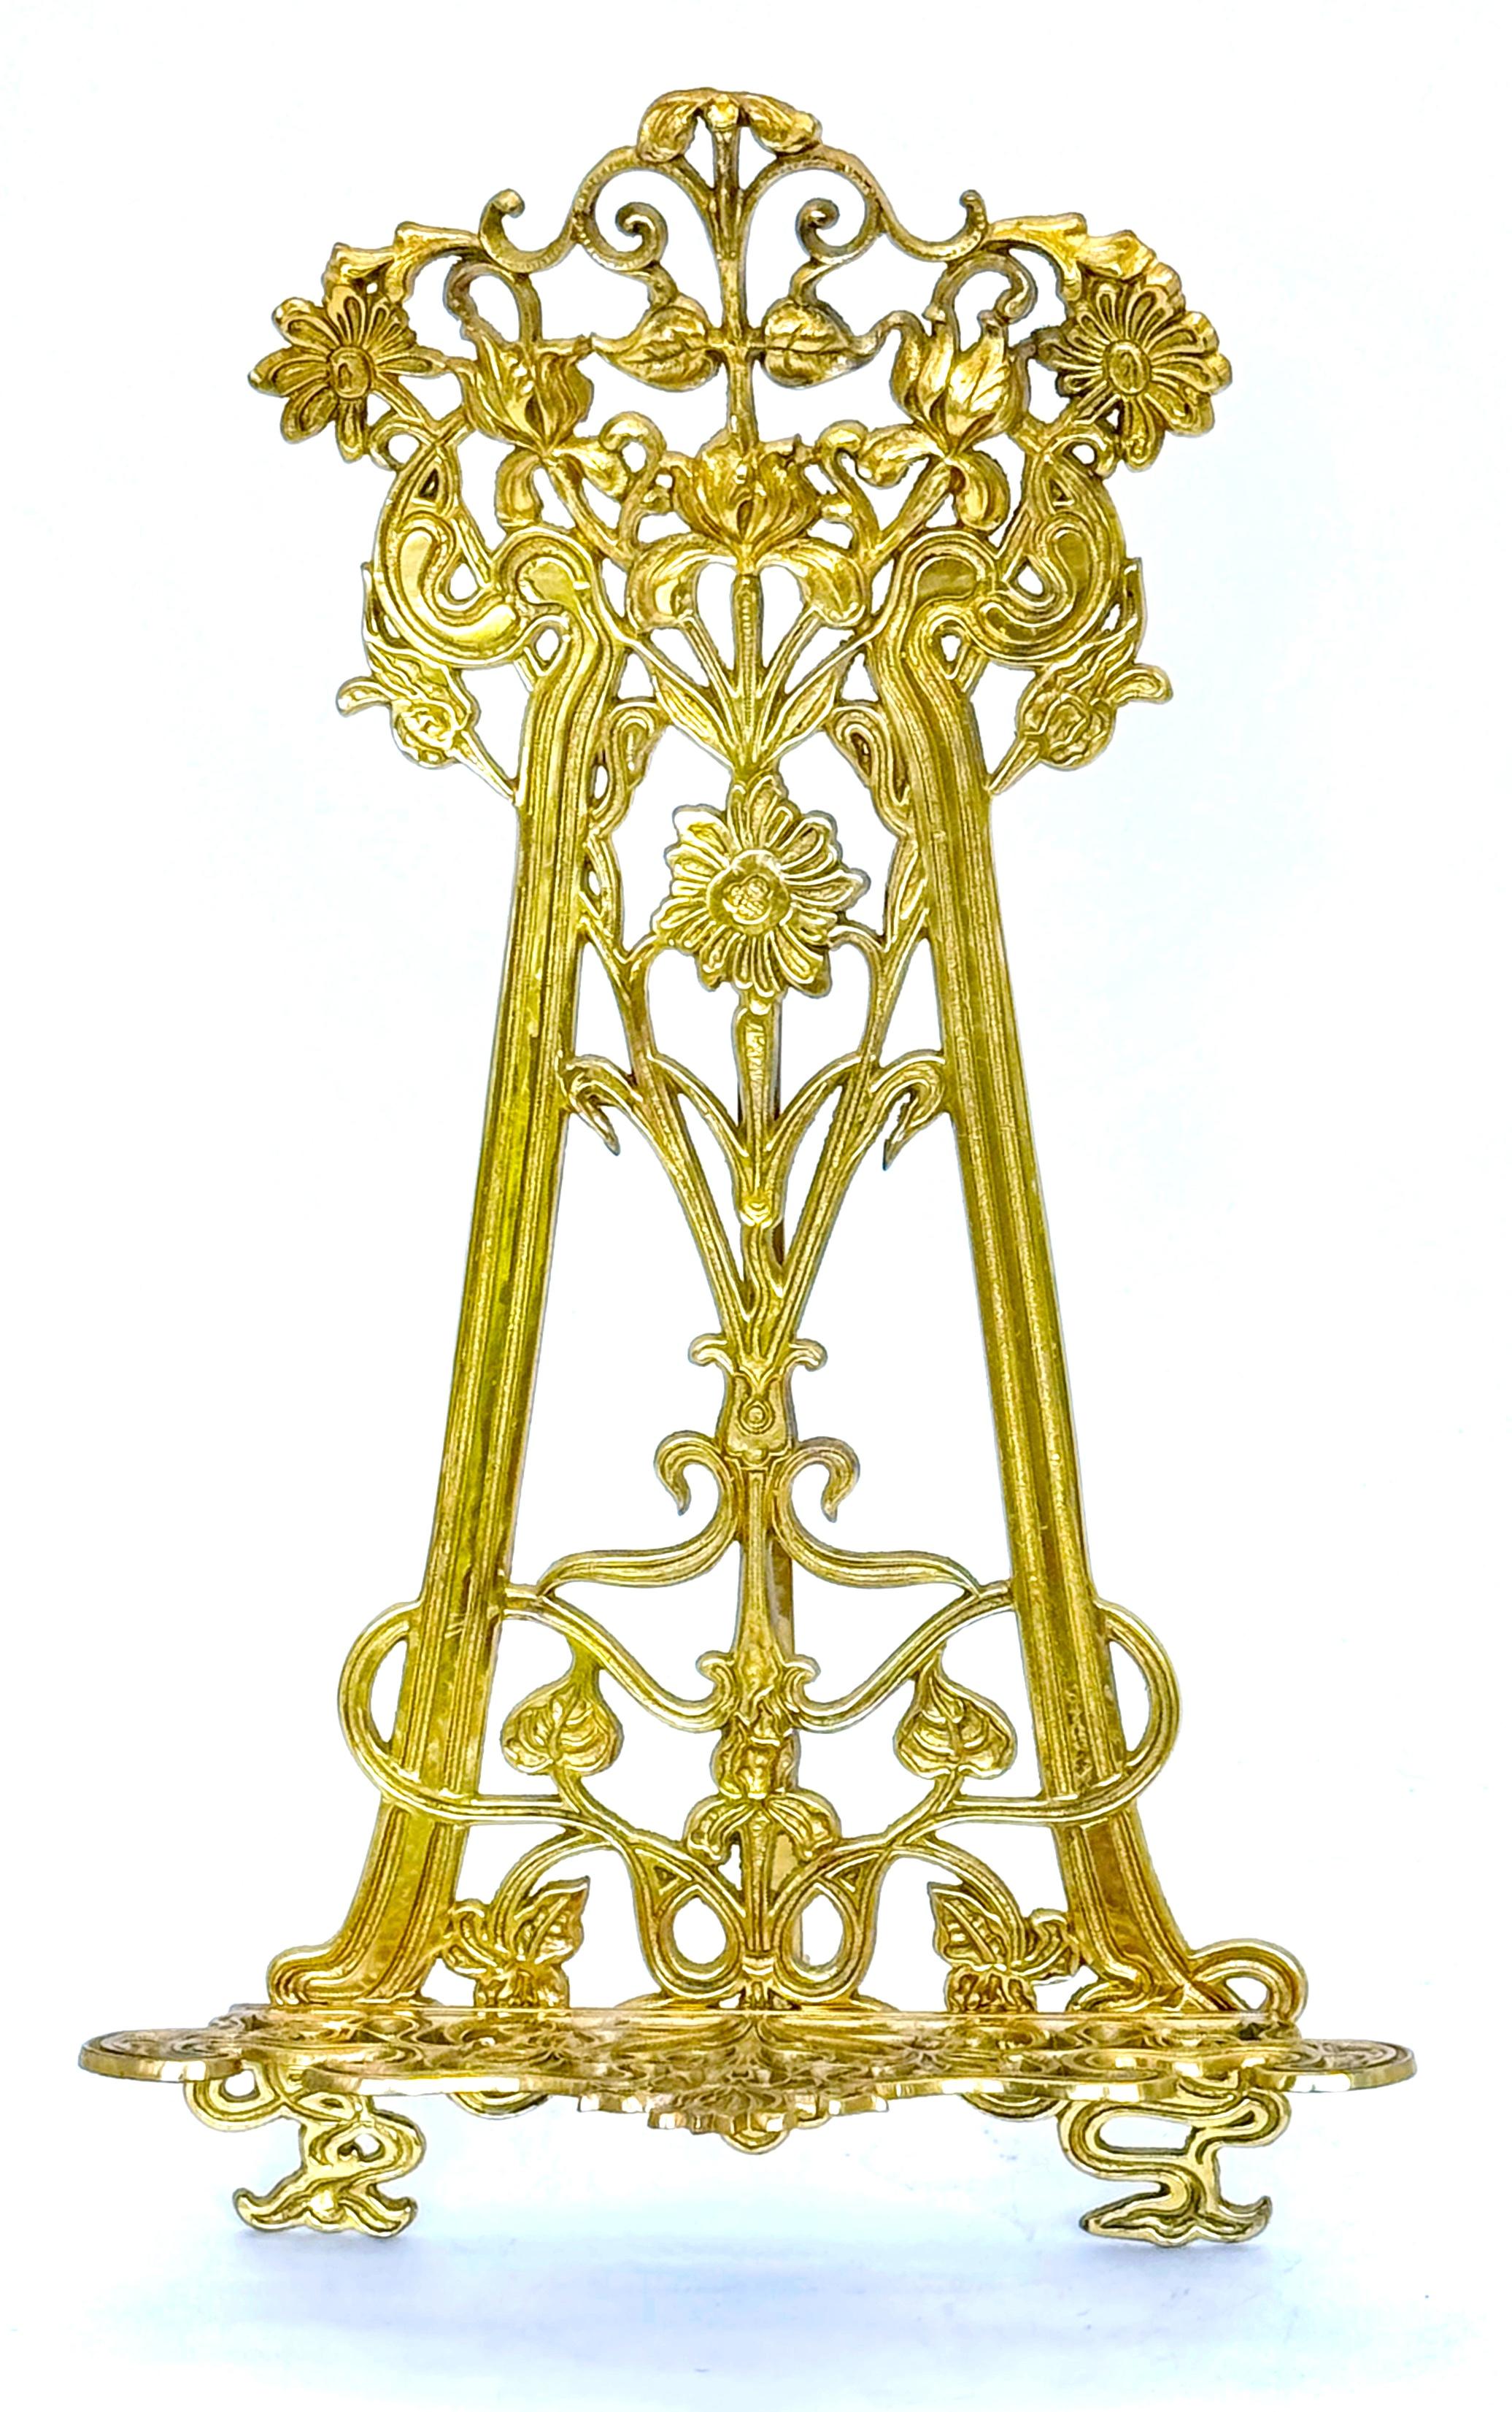 English Art Nouveau Floral Brass Table Bookstand/ Easel
England, 20th Century 

A magnificent example of English Art Nouveau with this exquisite Brass Table Bookstand/Easel. Made in England during the 20th century, it stands as a testament to the